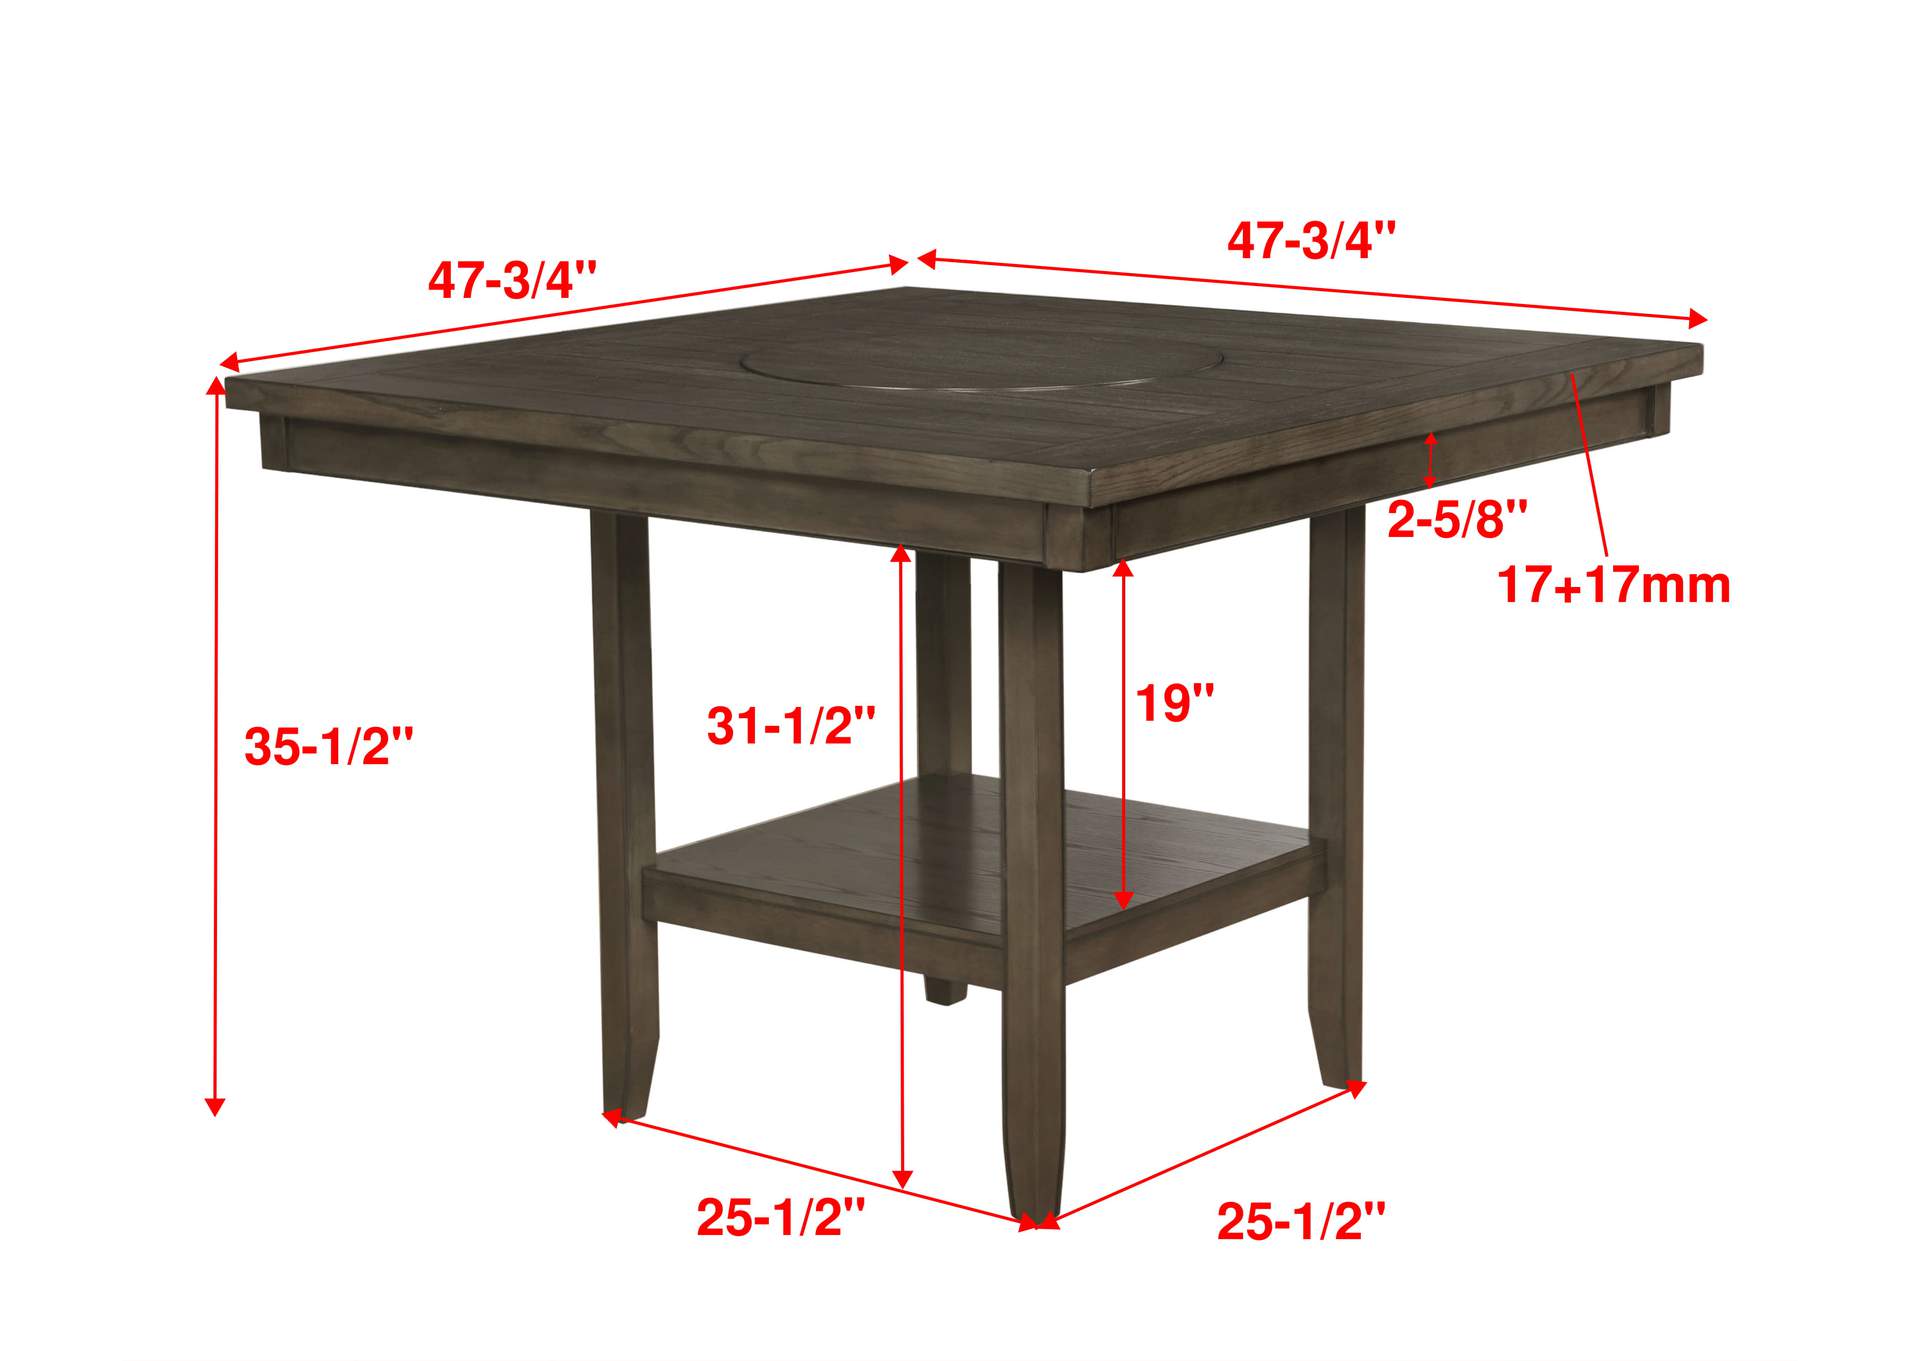 Fulton Counter Ht. Table Grey,Crown Mark